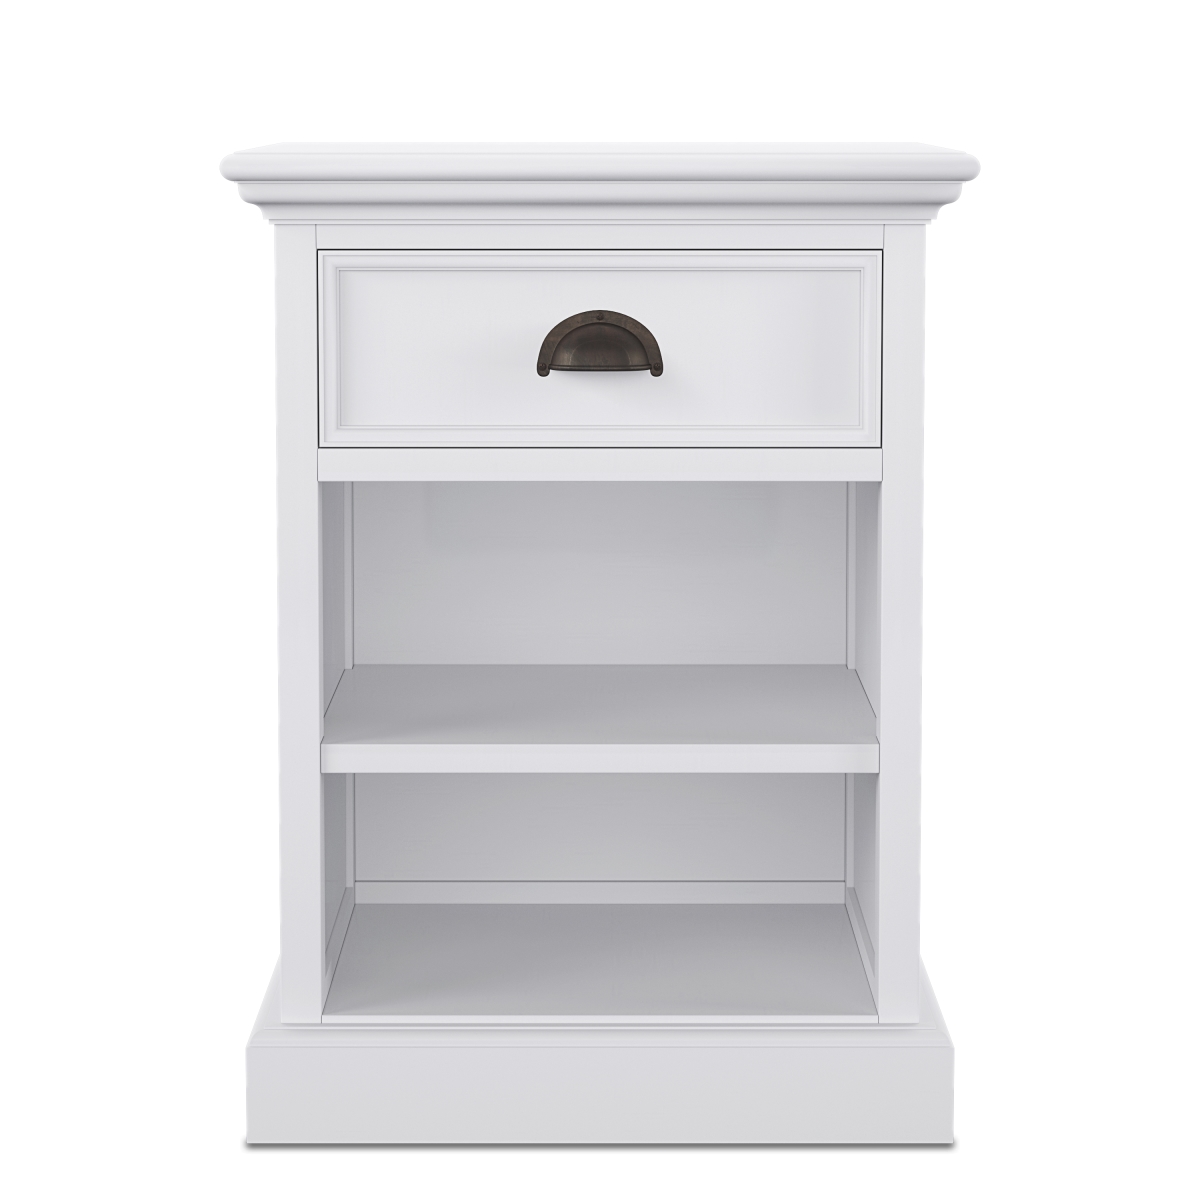 T764 Halifax Bedsidetable With Shelves, White - 16.93 X 17.72 X 23.62 In.